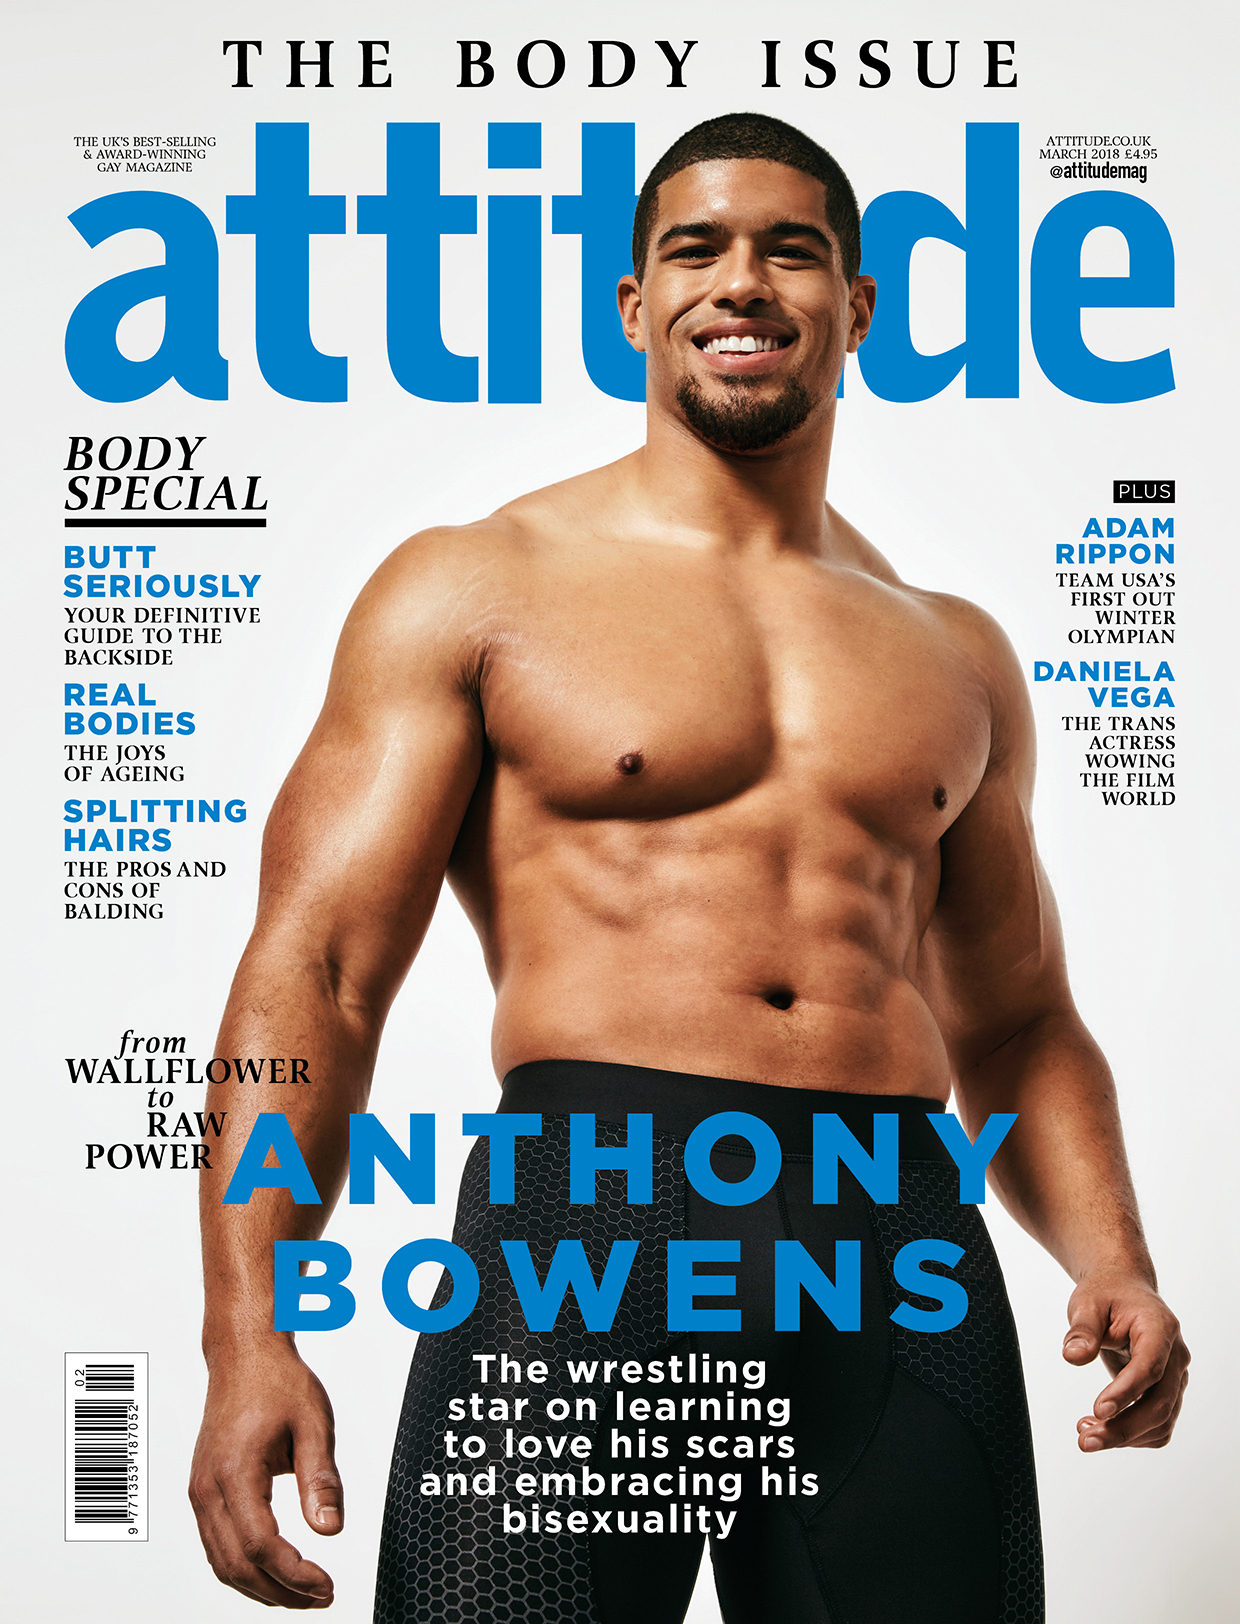 Anthony Bowens said at one point he was eating seven meals a day (Attitude)